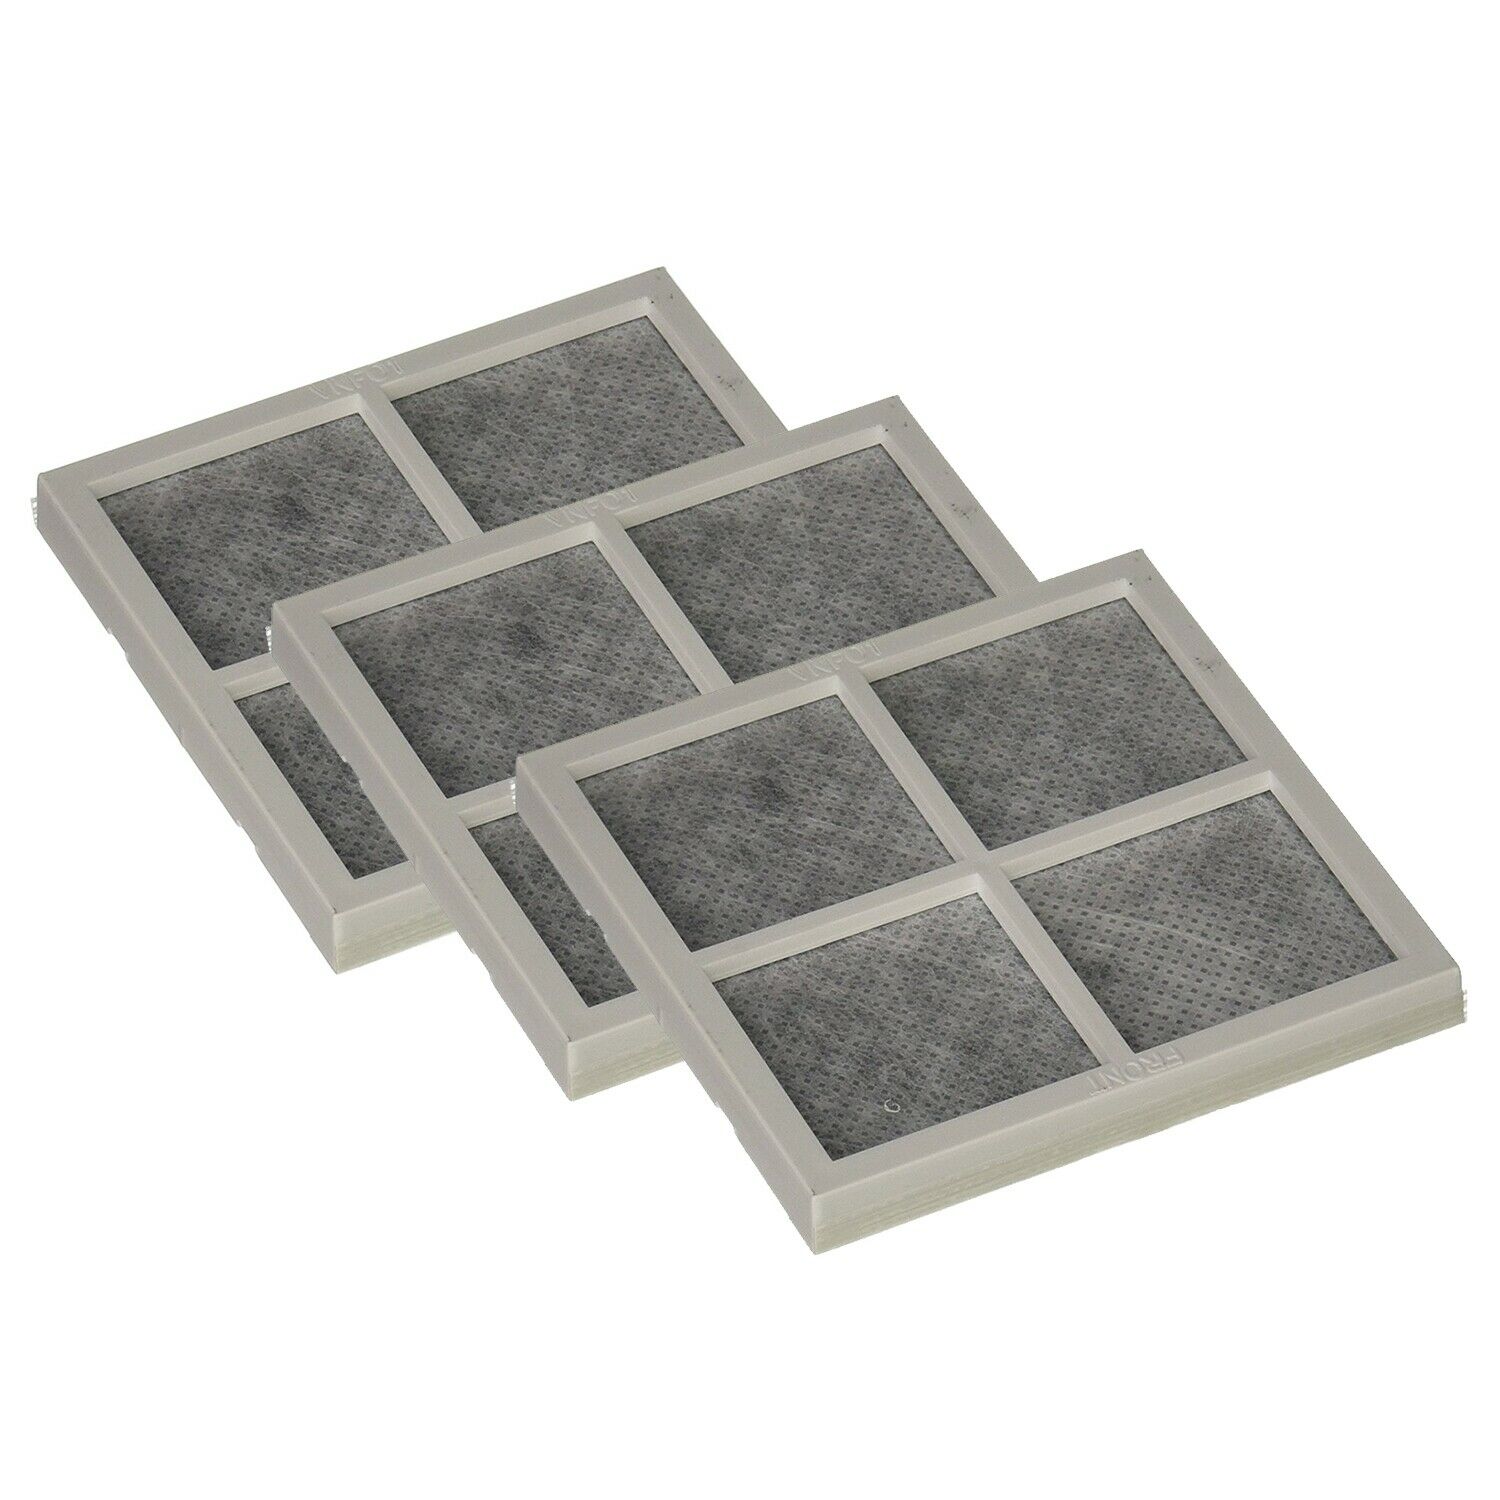 Direct factory 3pack Replacement air filter for LG refrigerators